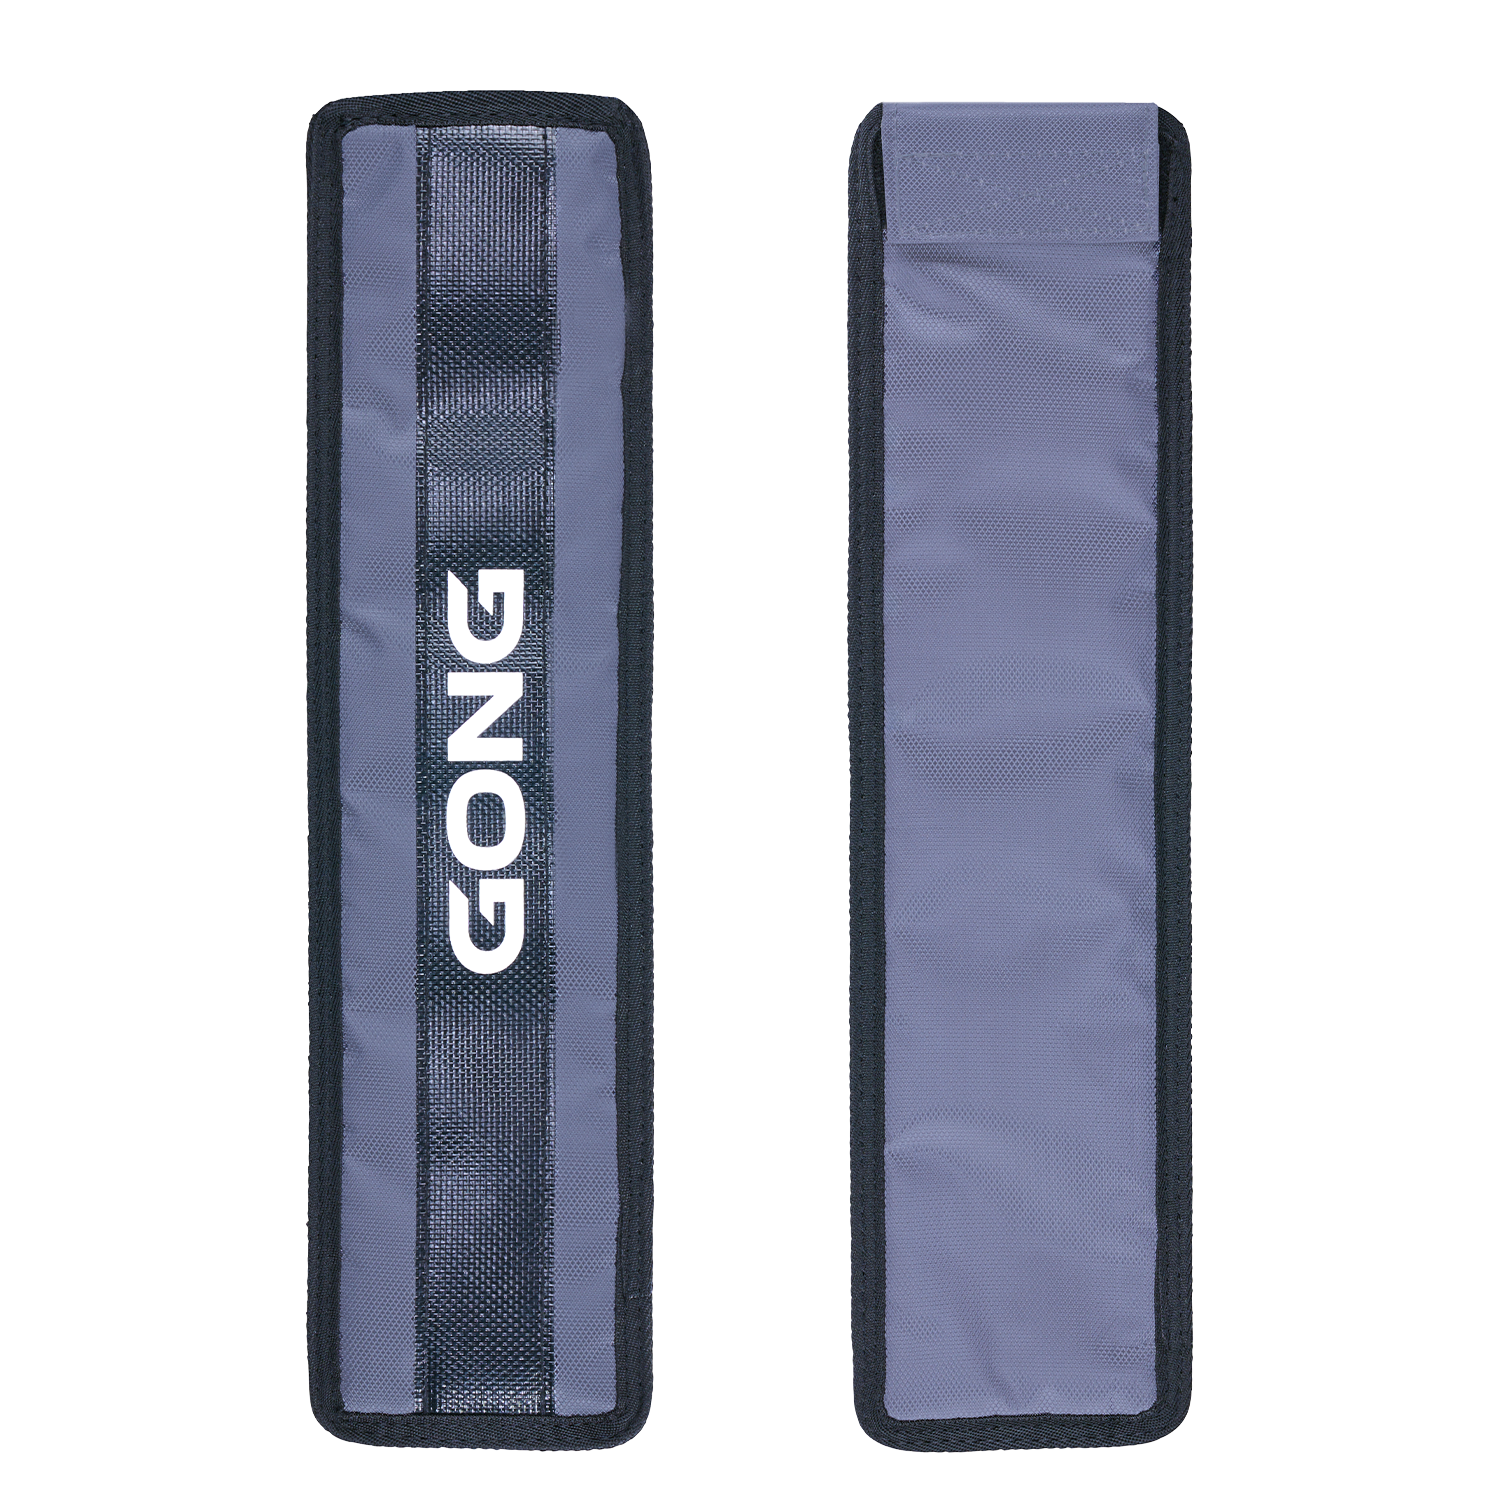 GONG | Foil Fuselage Cover